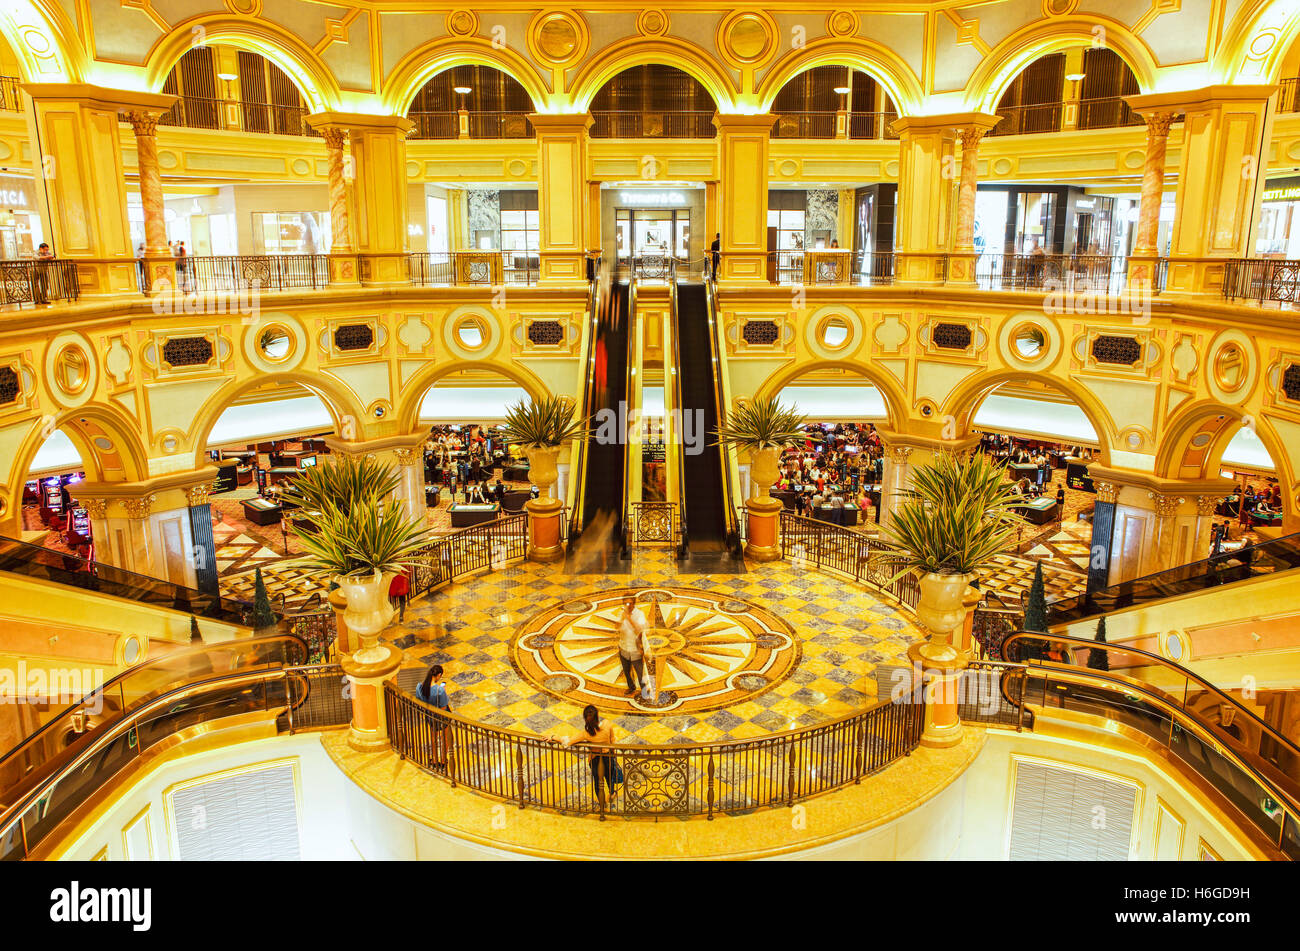 The Great Hall of the Venetian Hotel and Casino, Cotai, Macao. Stock Photo